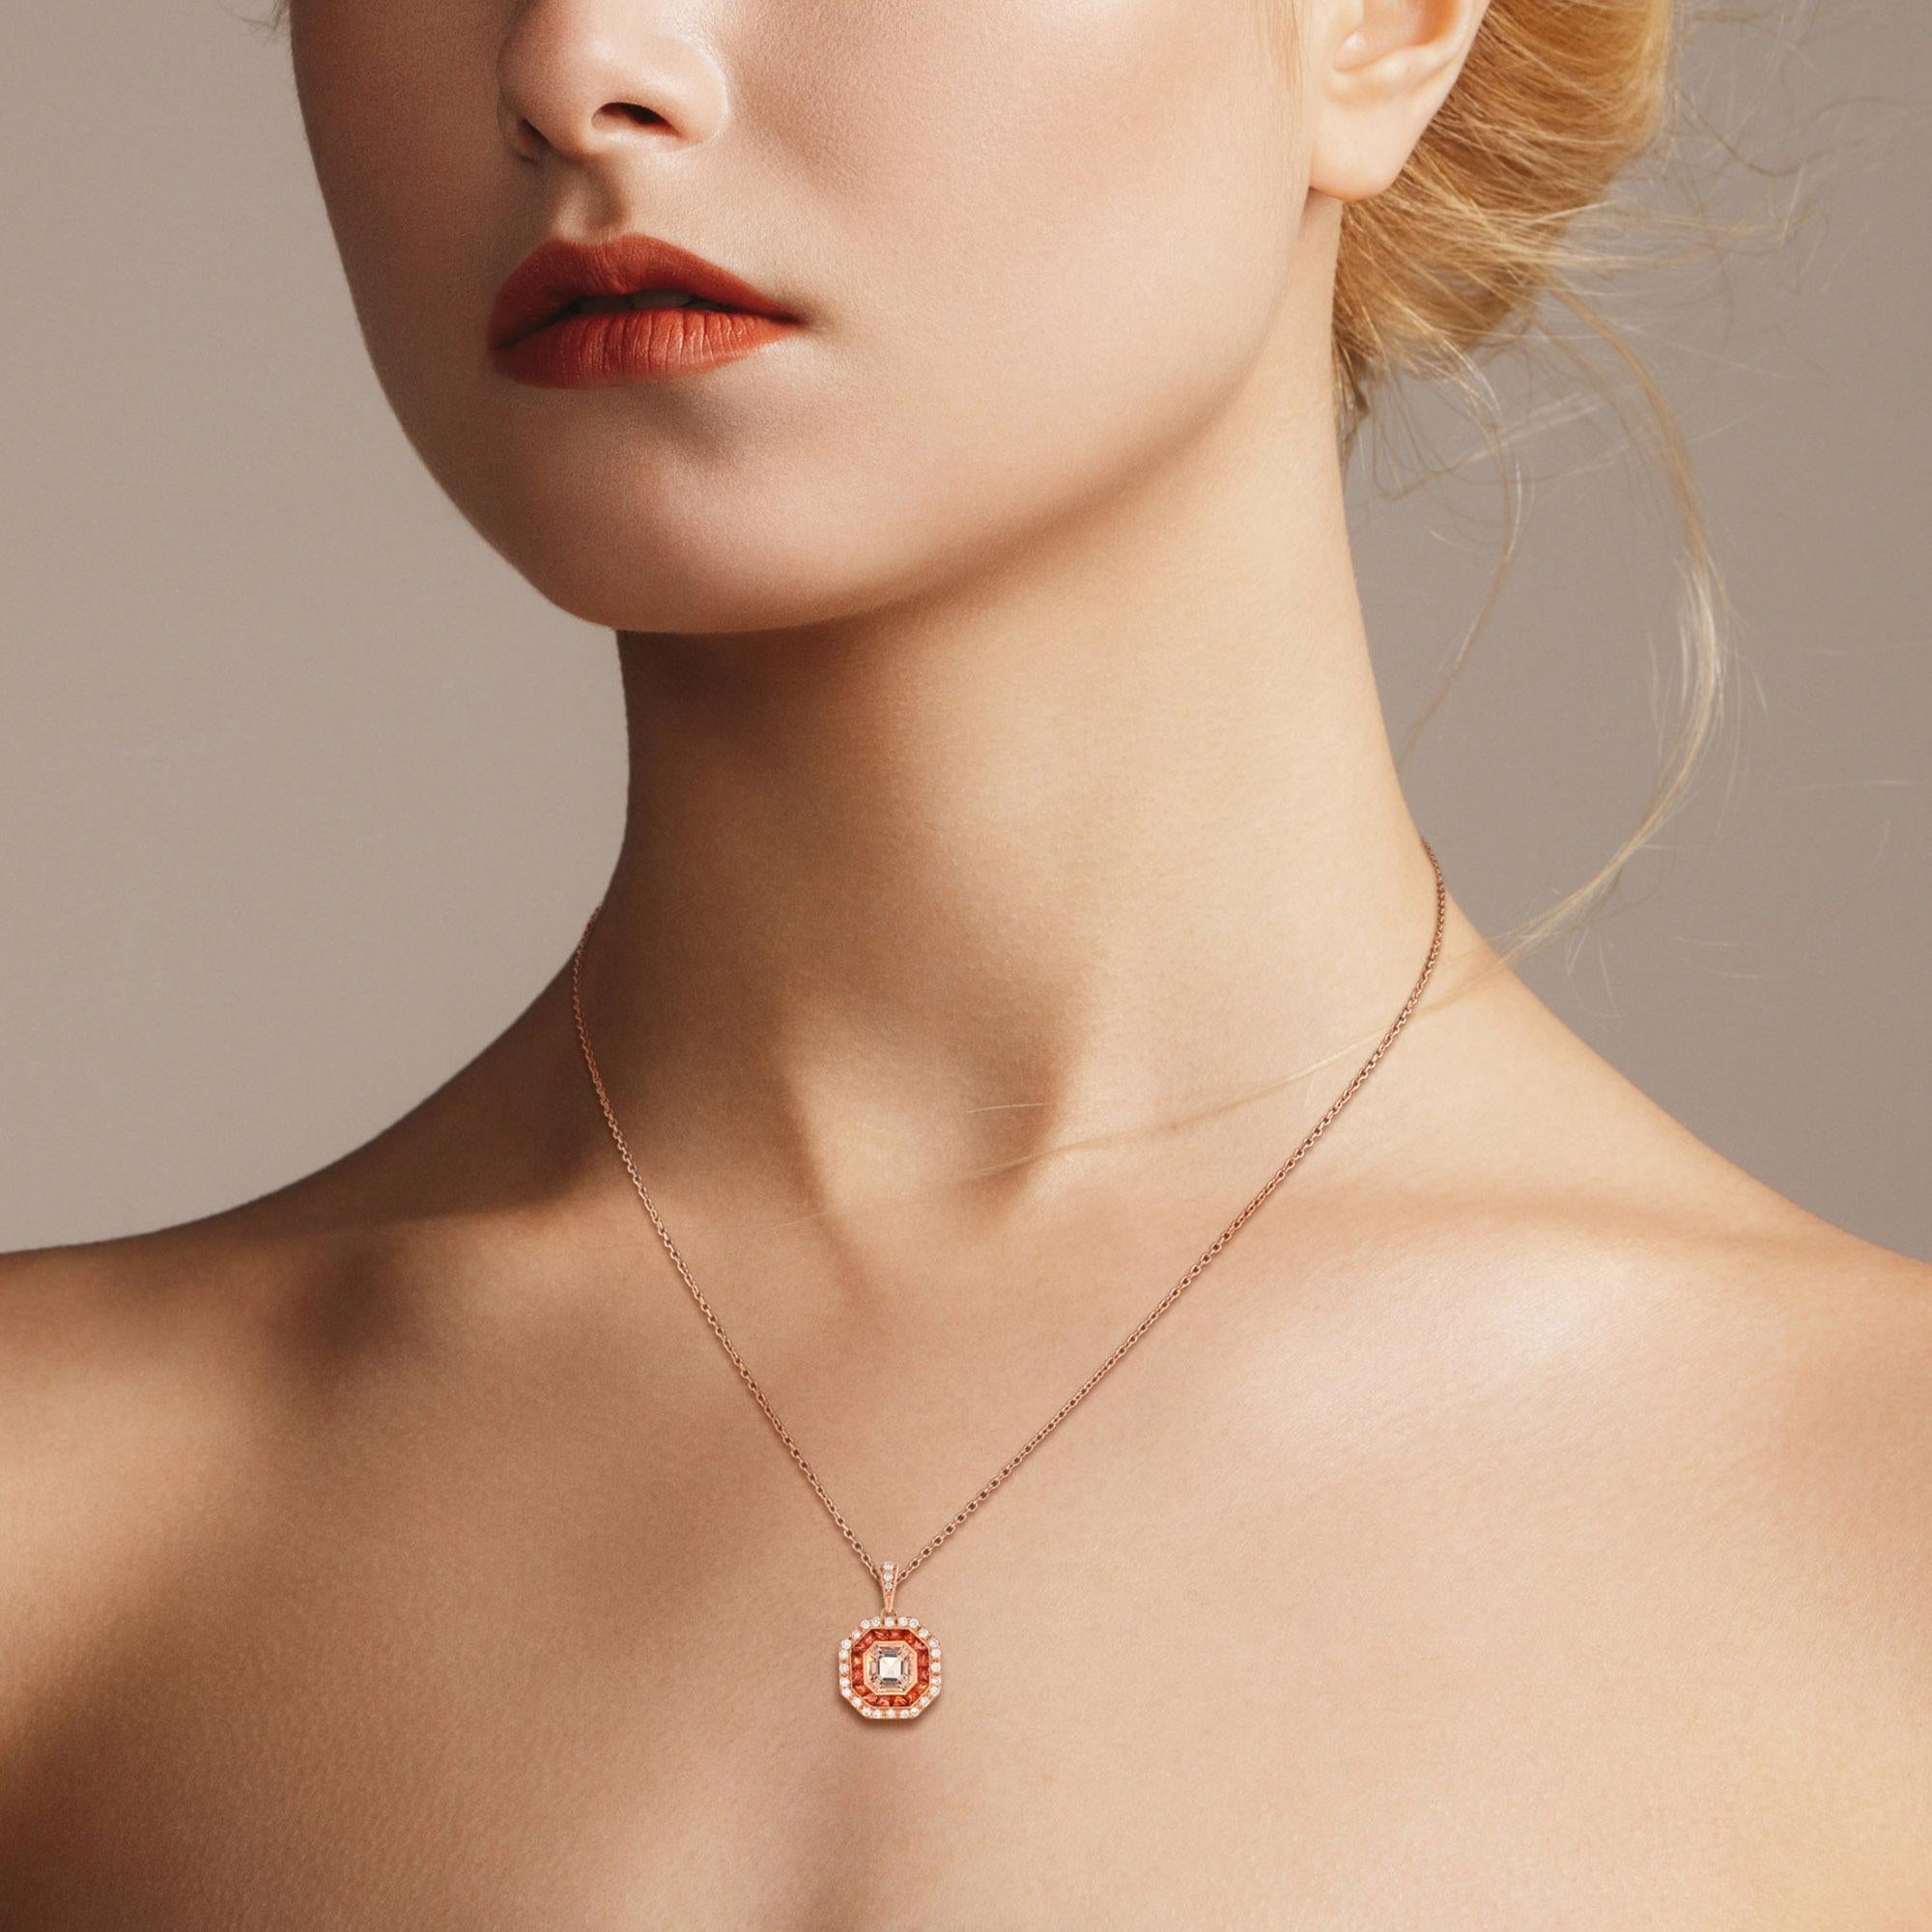 This morganite with orange sapphire and diamond pendant presents a stunning example of Art Deco styling and design. Emerald cut pale peach color morganite, French cut orange sapphire, and round cut diamond are precisely arranged to create intricate